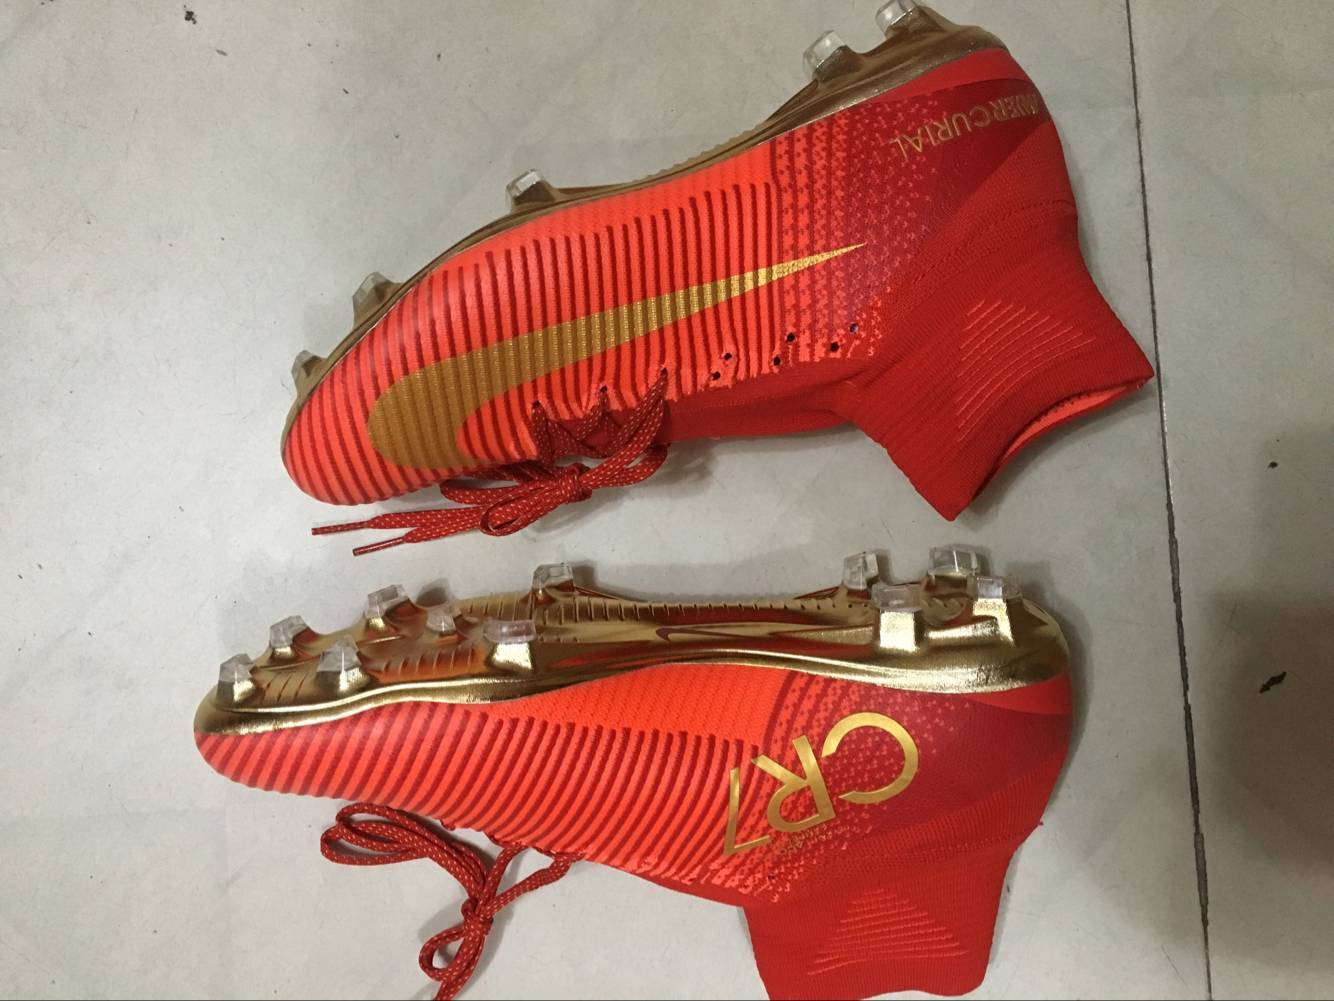 Cheap Nike Mercurial Superfly  Cr7 Campeões Special Portugal Boots